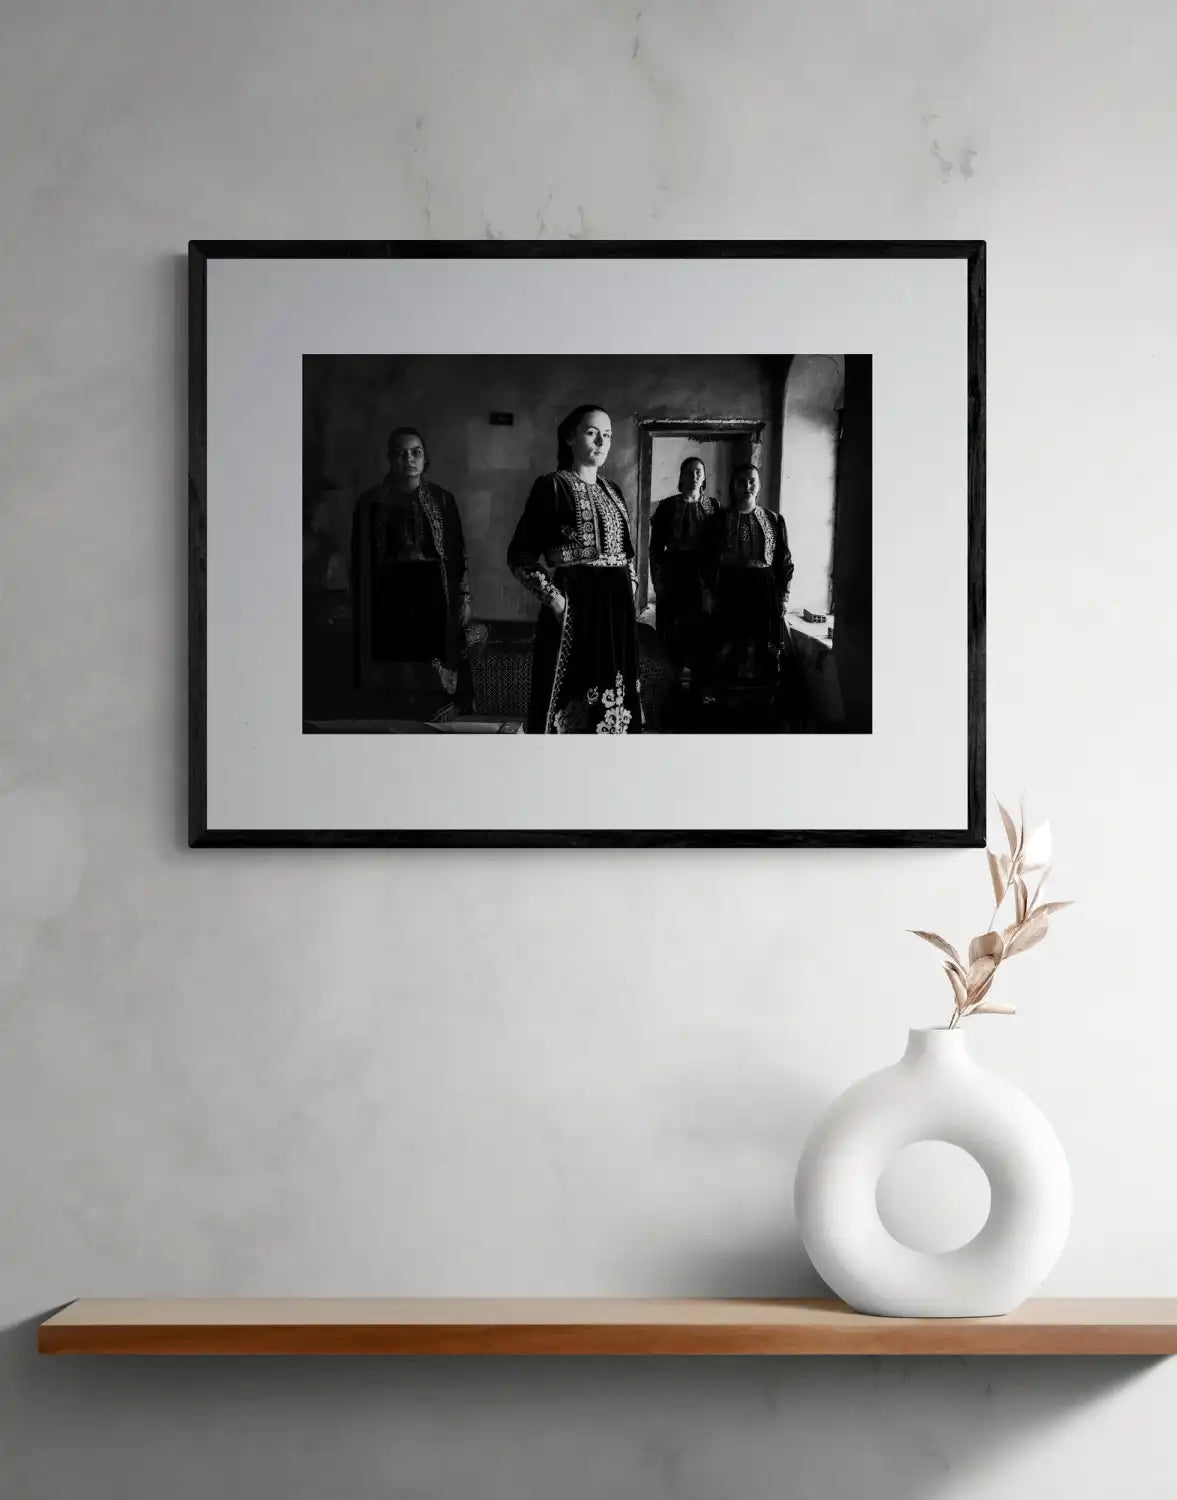 Filiates, Thesprotia, Epirus, Greece | Dresses in a House | Black-and-White Wall Art Photography - single print framed